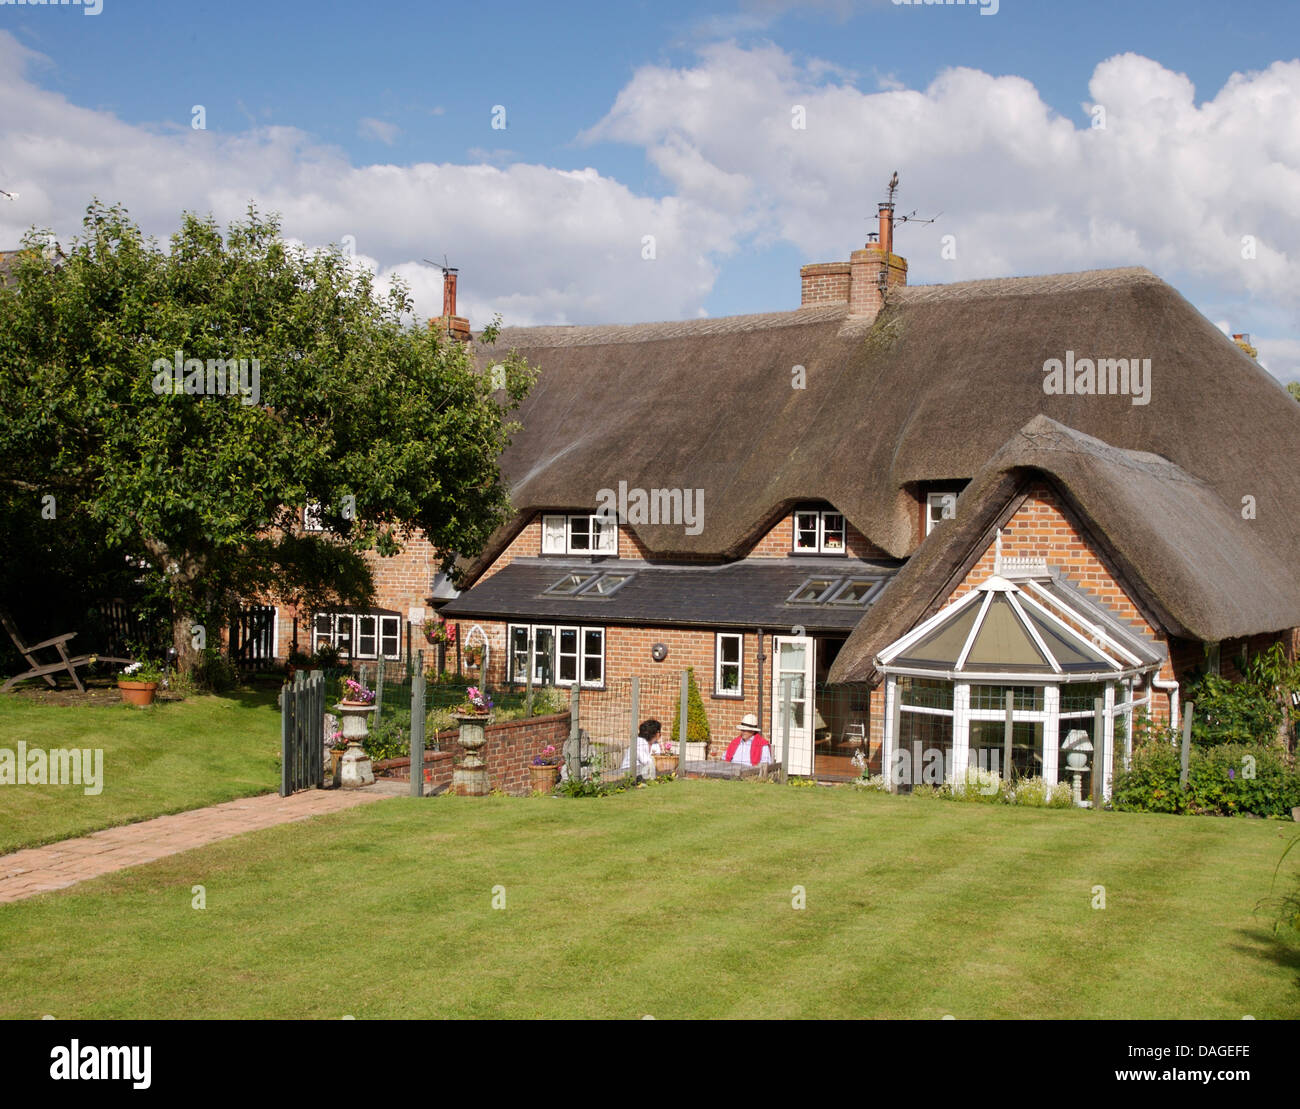 Lawn in front of large country cottage with thatched roof and conservatory extension Stock Photo